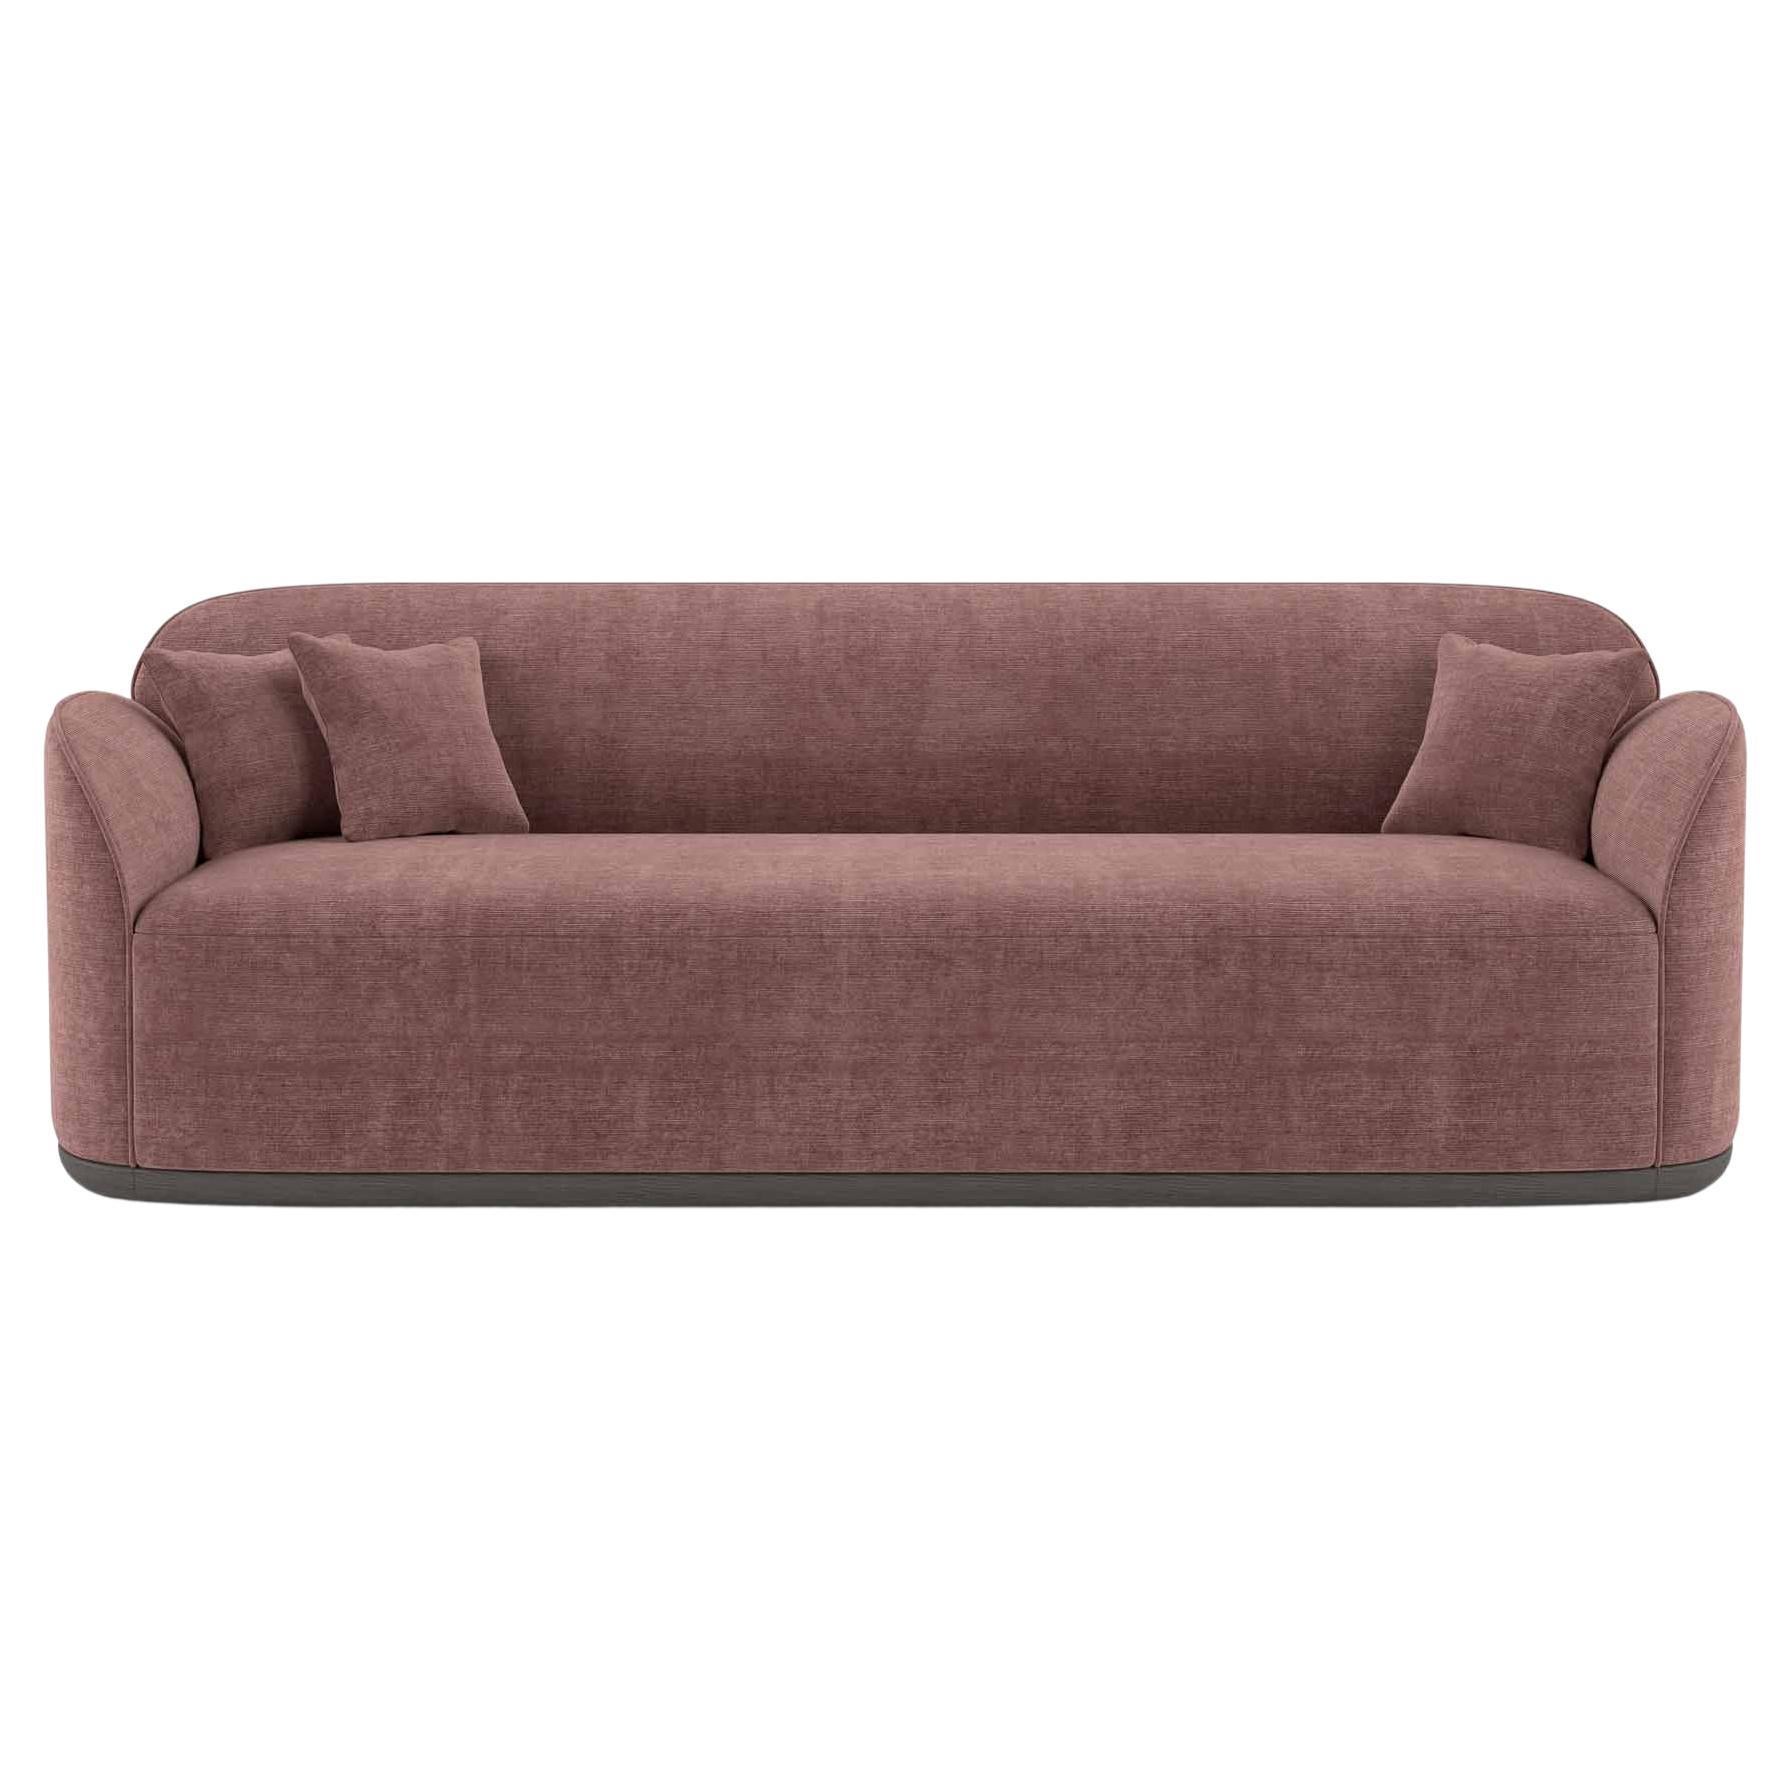 Unio Sofa Upholstered with Dedar Pergamena Fabric by Poiat For Sale